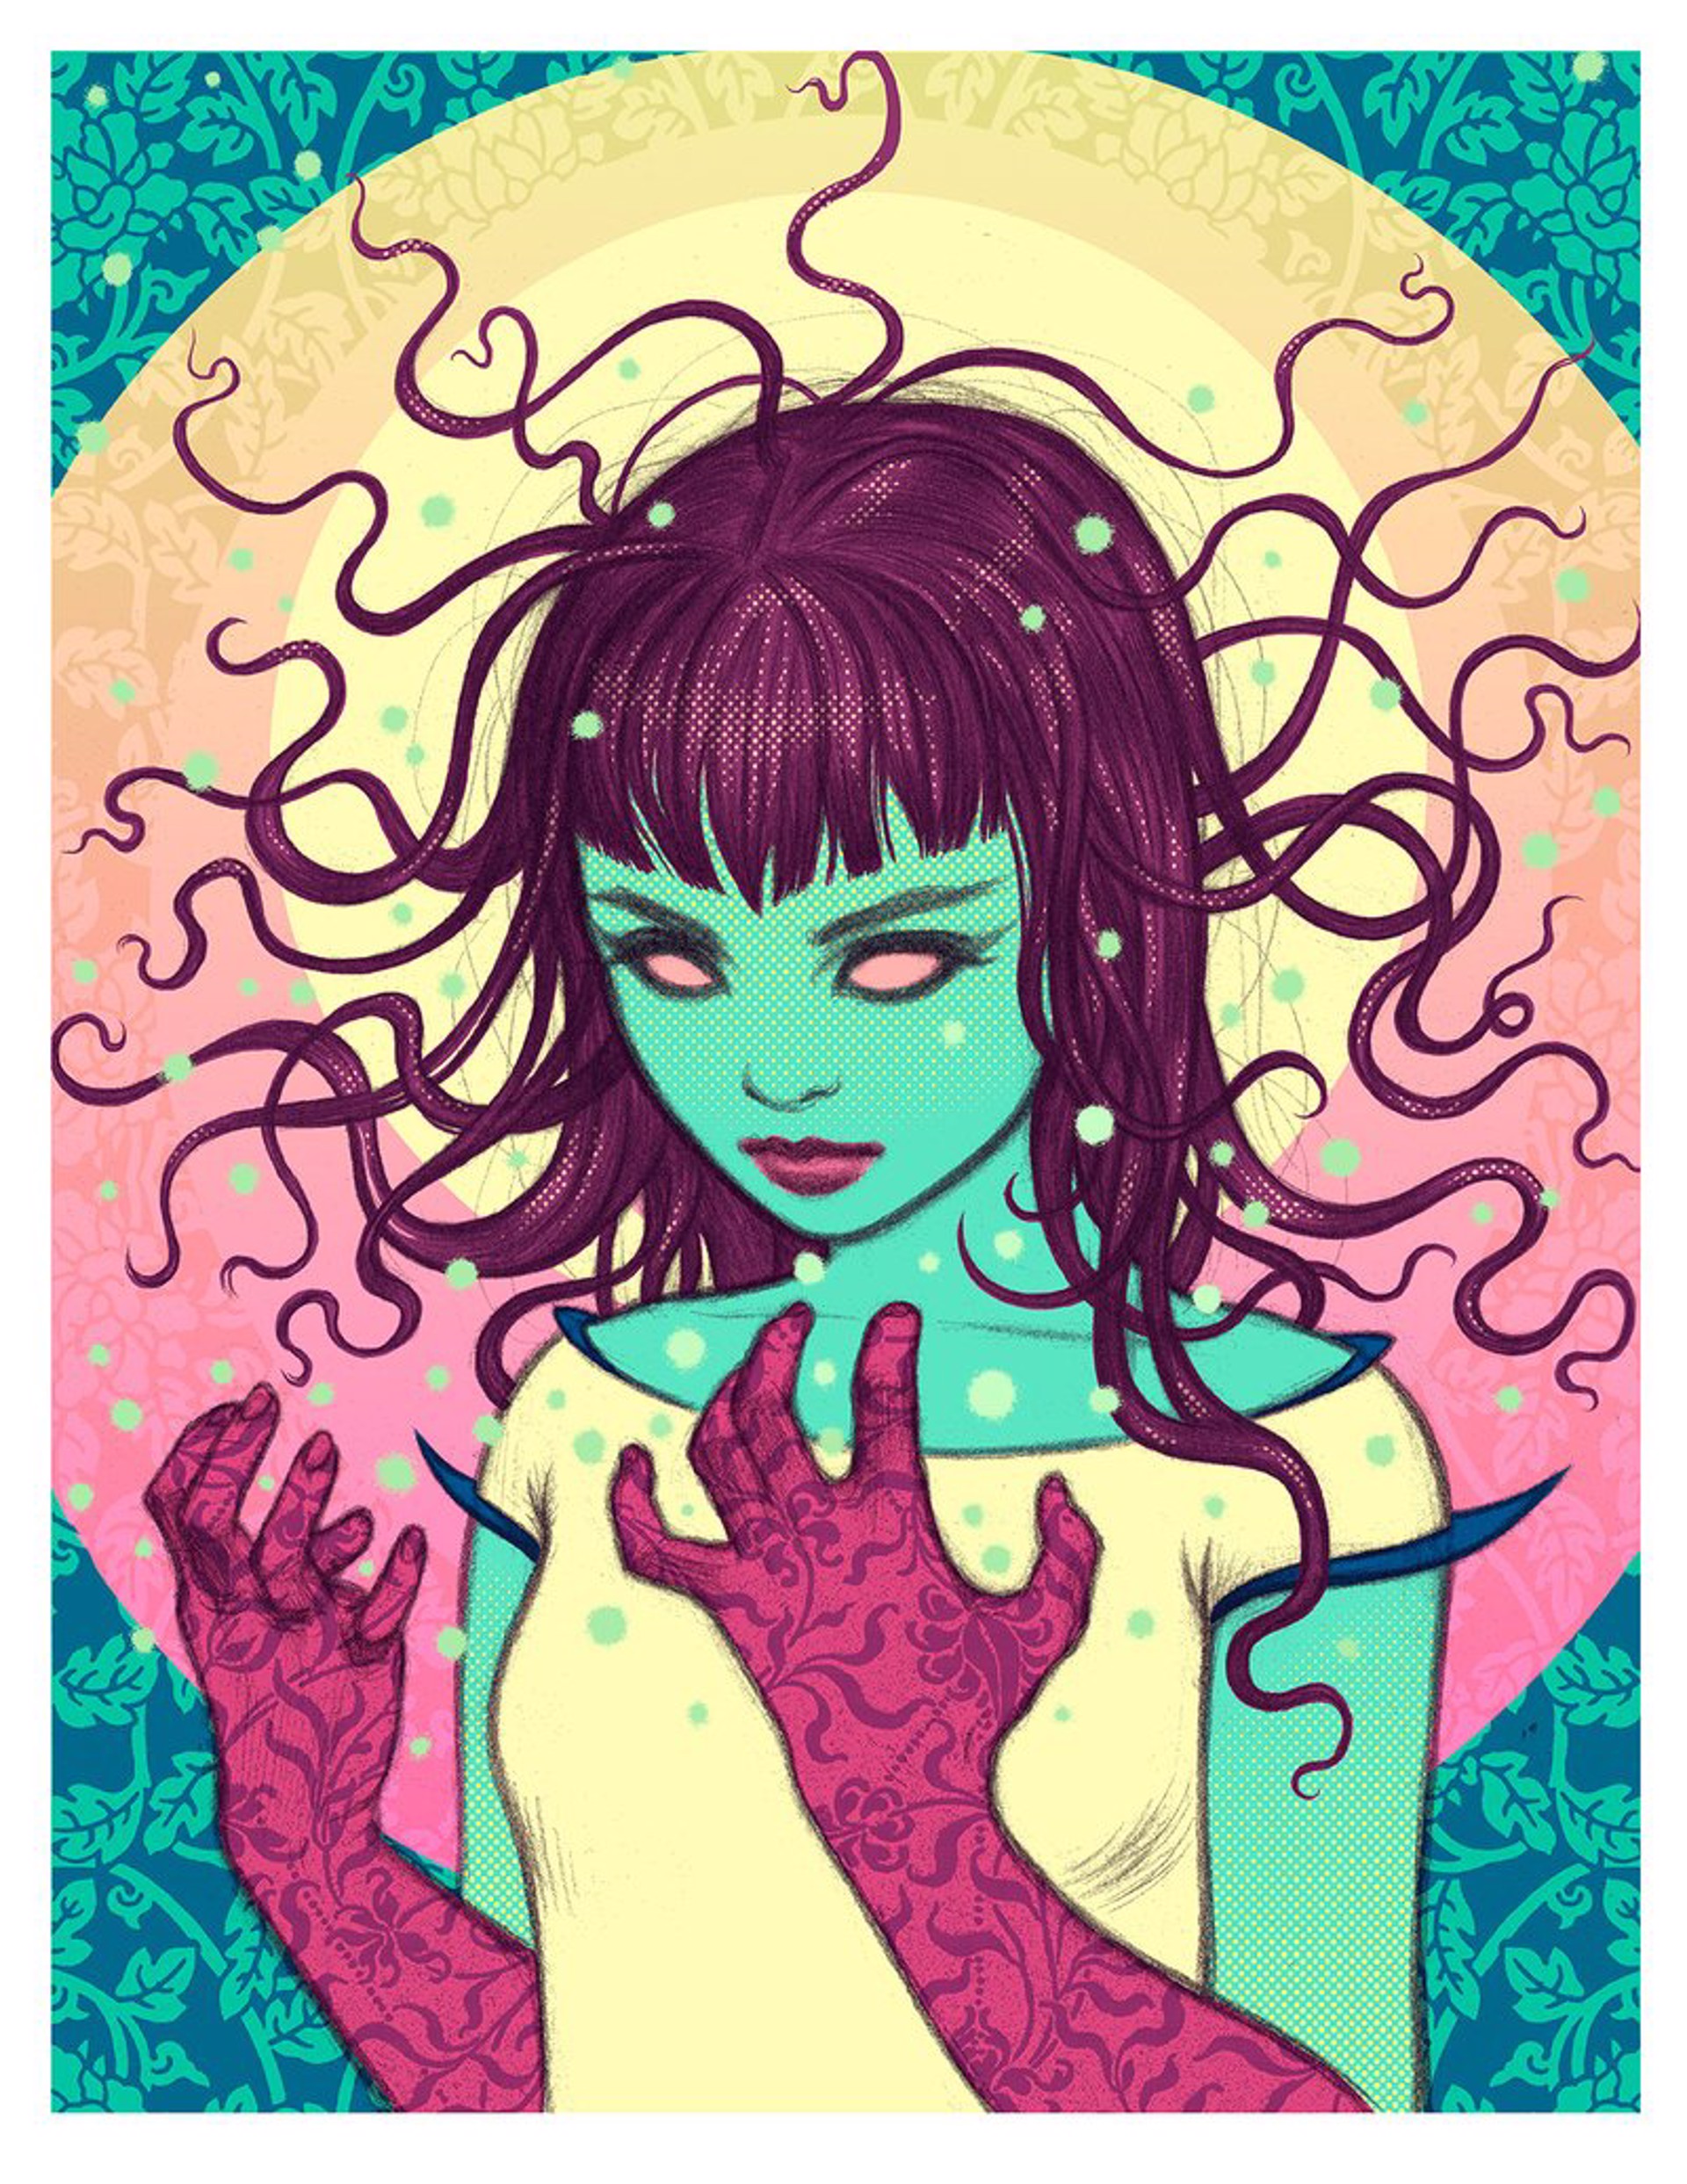 The Absence of Gravity (12/200) by Tara McPherson